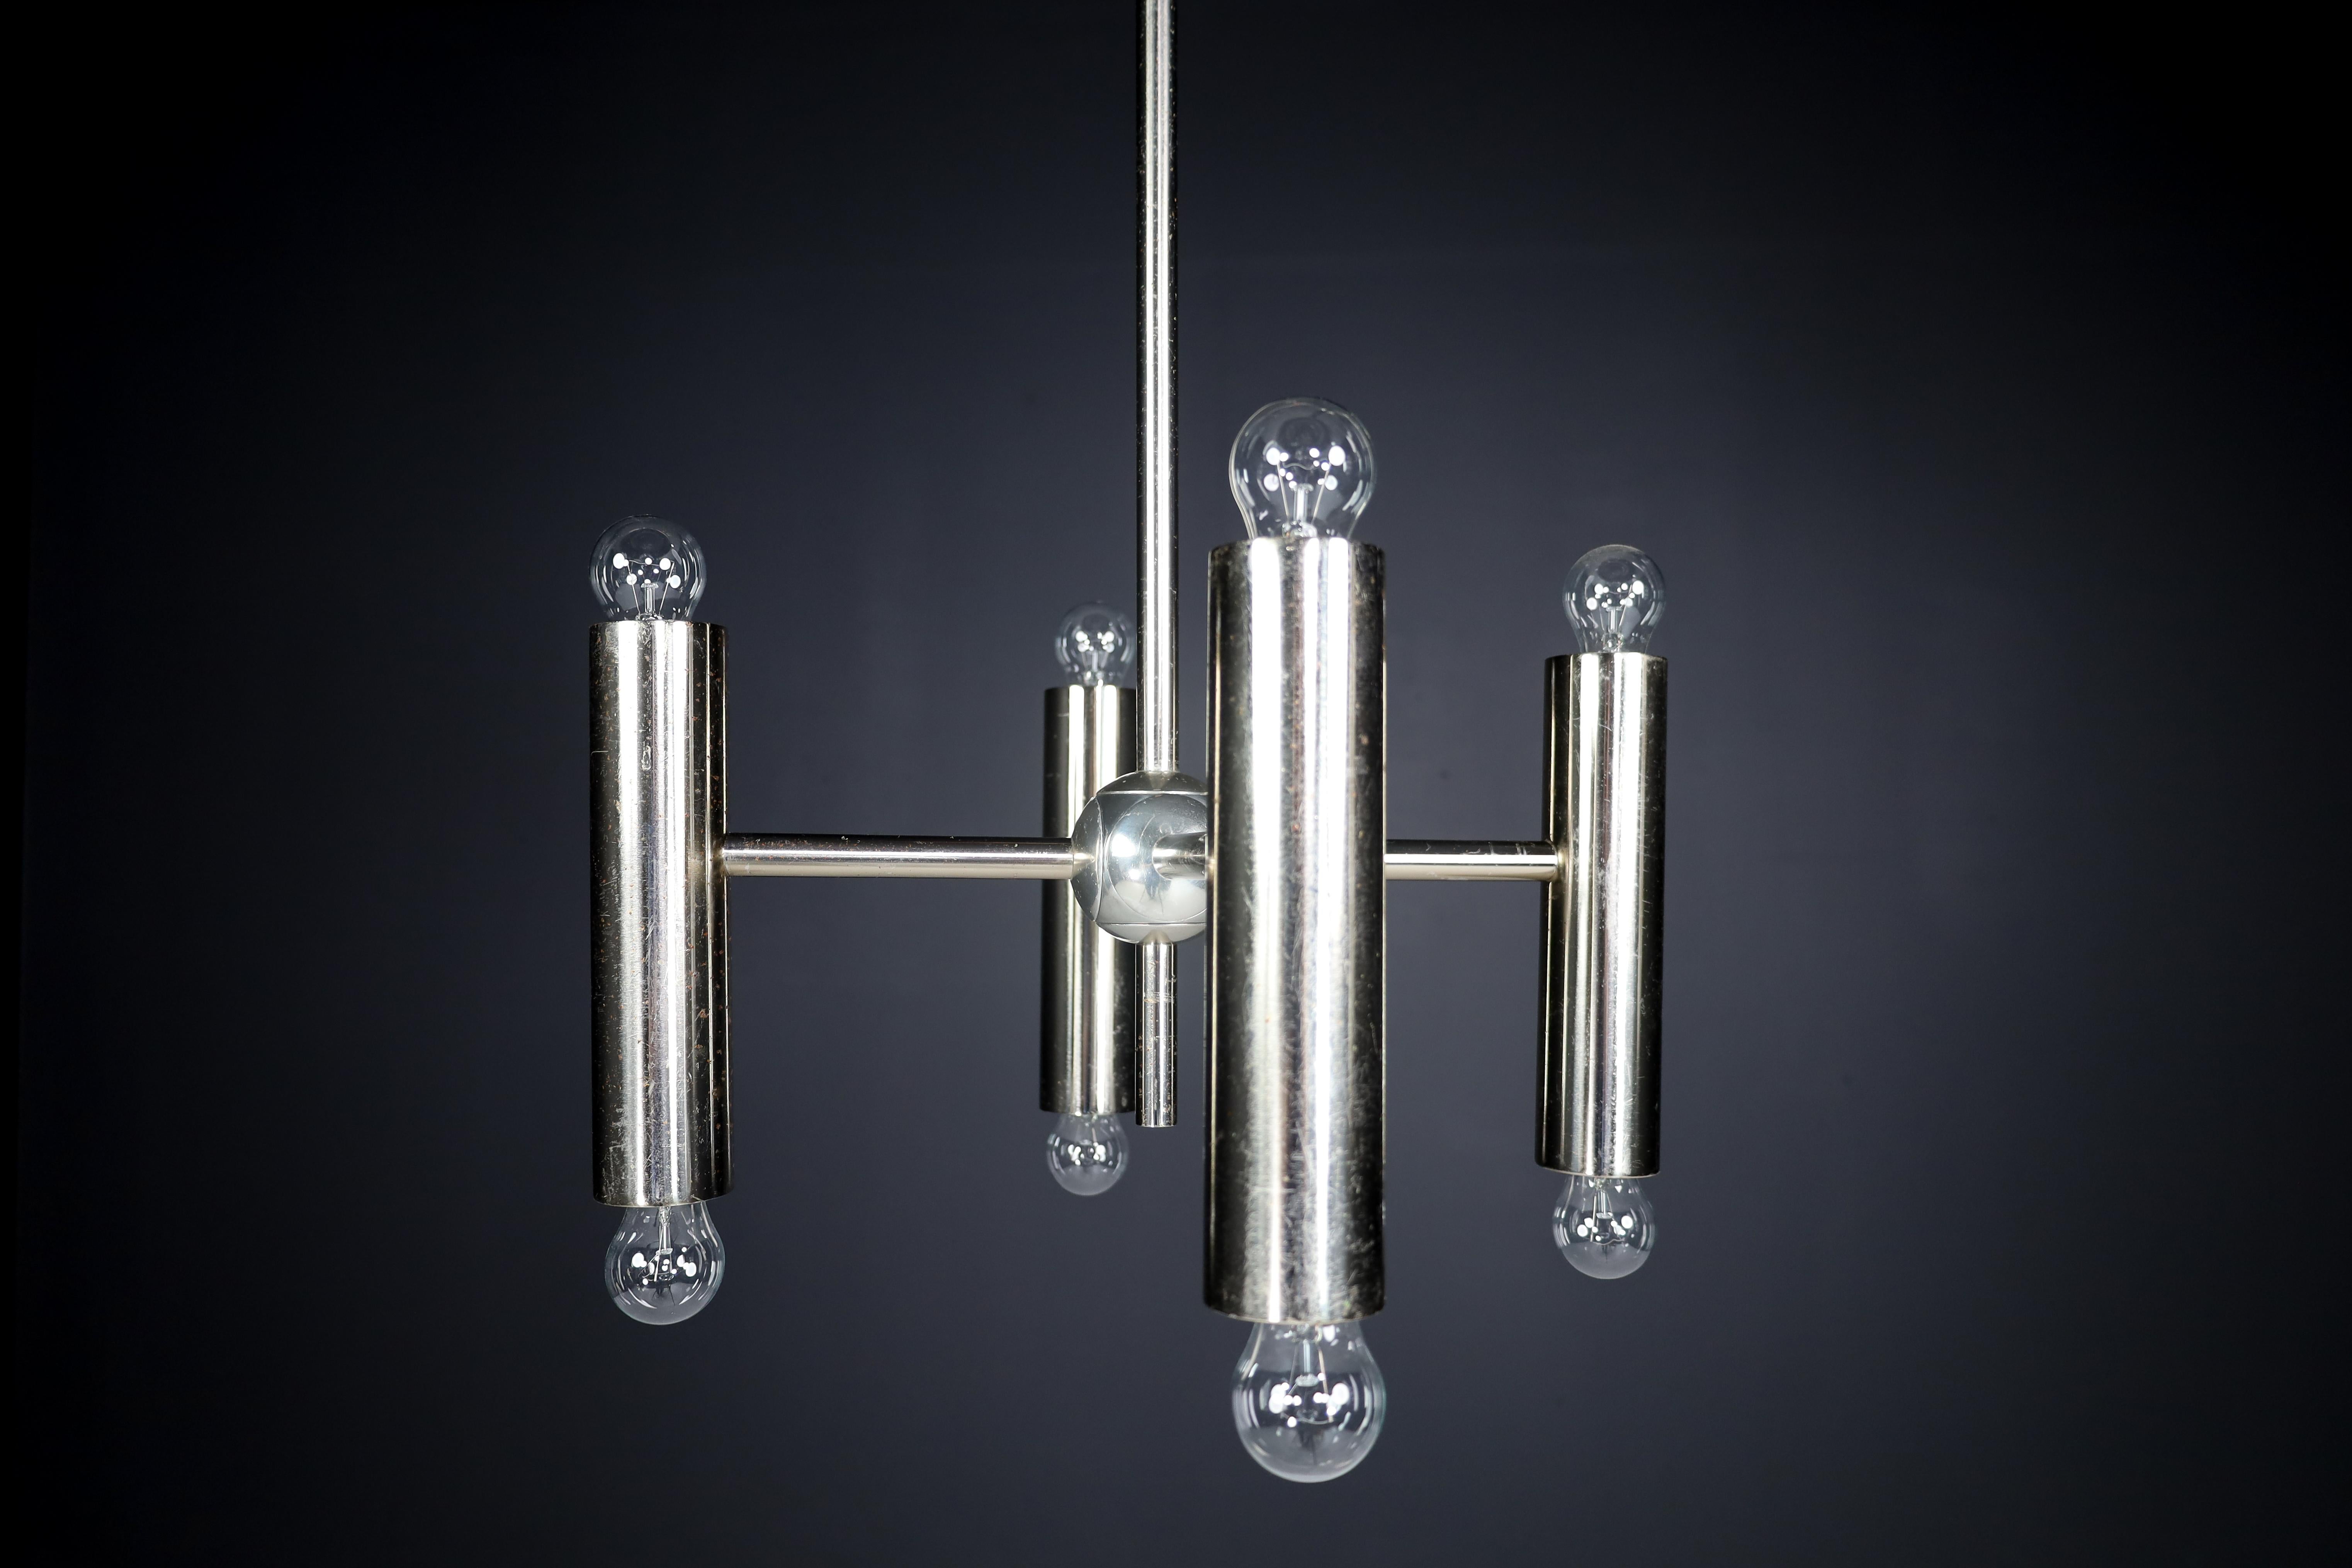 1 of 6 Minimalistic Design Geometric Chandeliers in Chrome, Germany, 1970s For Sale 5